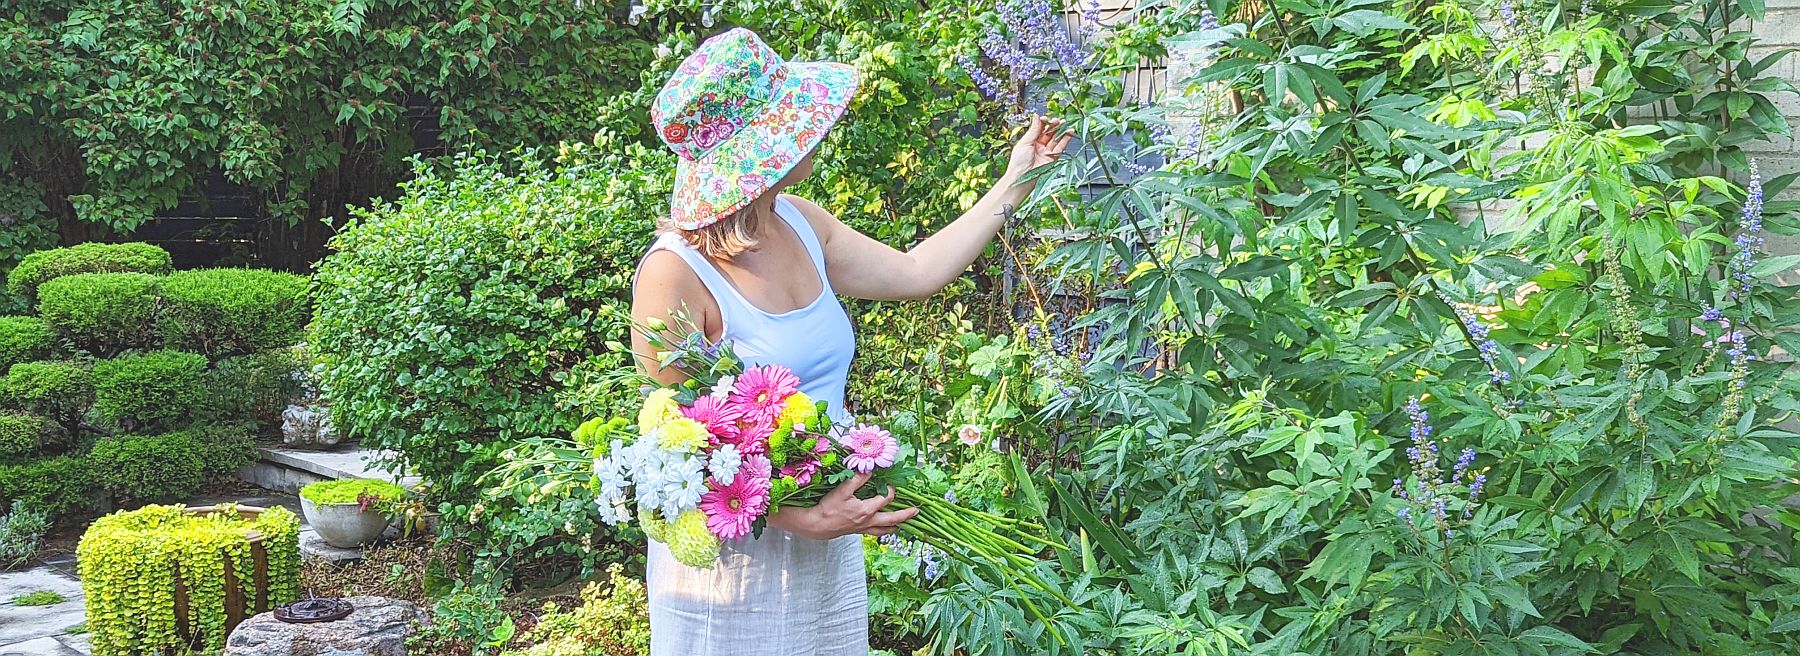 Cotton Print gardening hats. choose from shade garden ferns, rose garden or a riotous cutting garden print. UPF50 Excellent sun protection. made in canada by puffin gear